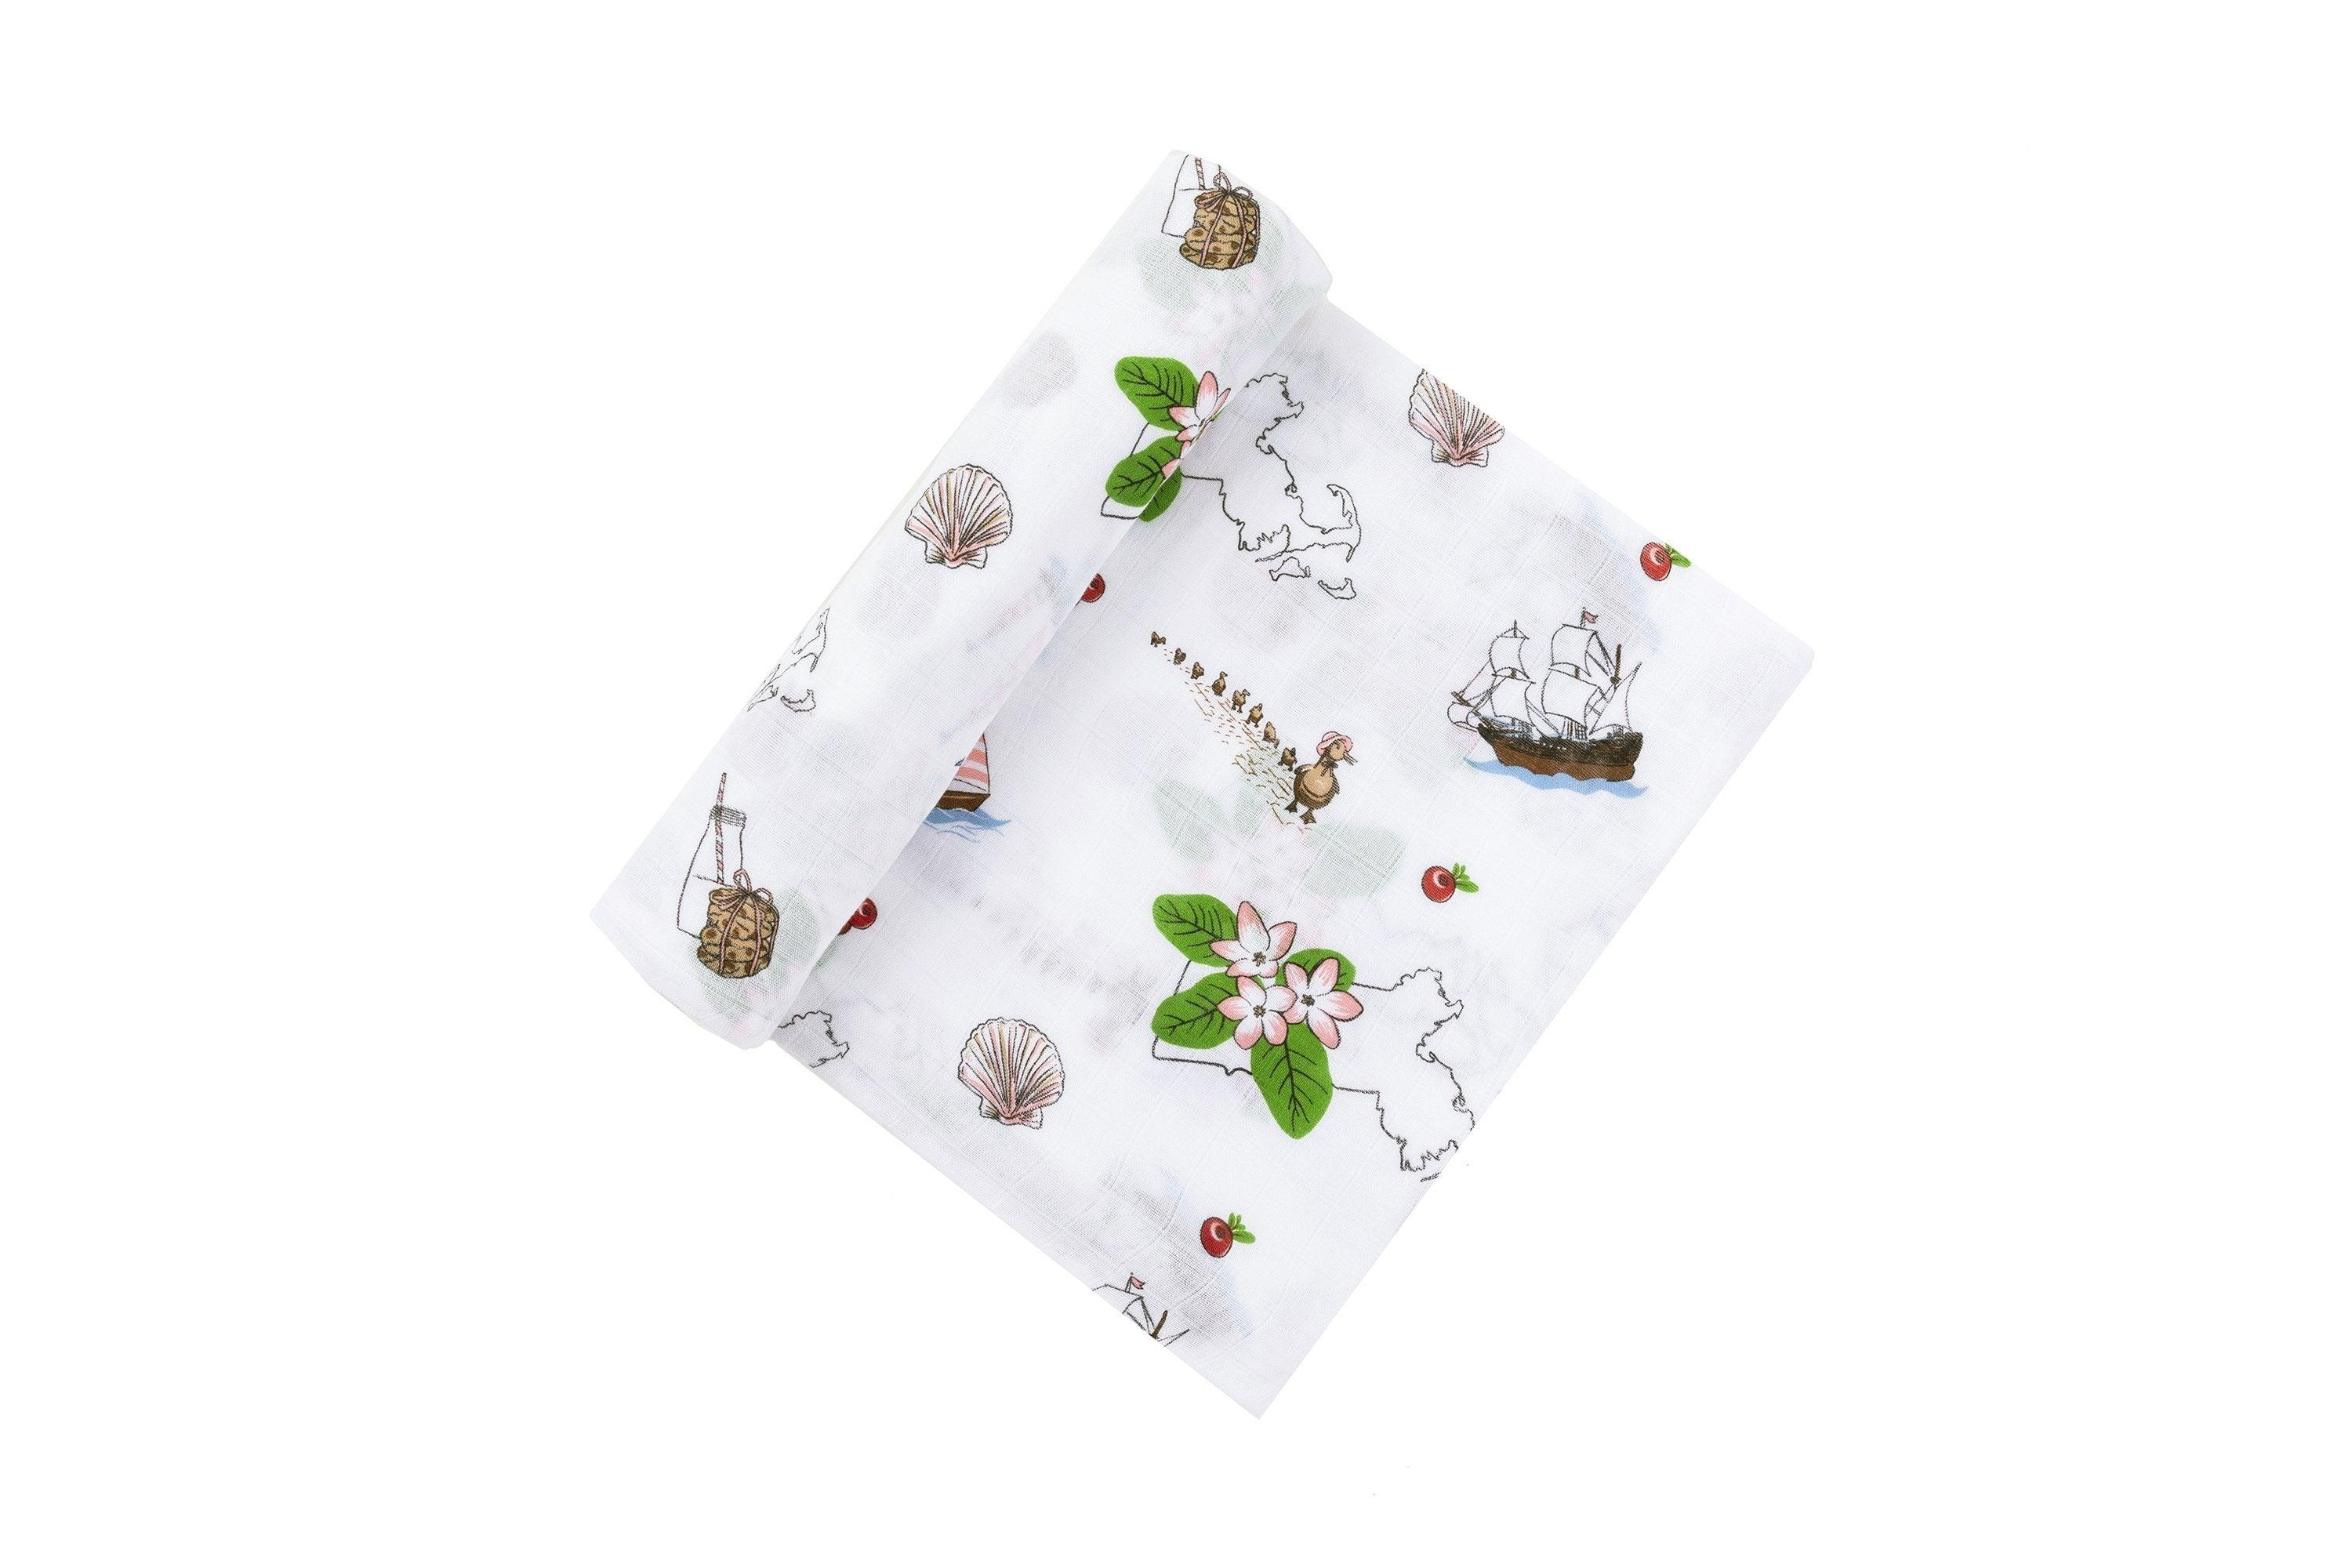 Gift Set: Massachusetts Floral Baby Muslin Swaddle Blanket and Burp Cloth/Bib Combo by Little Hometown - Vysn